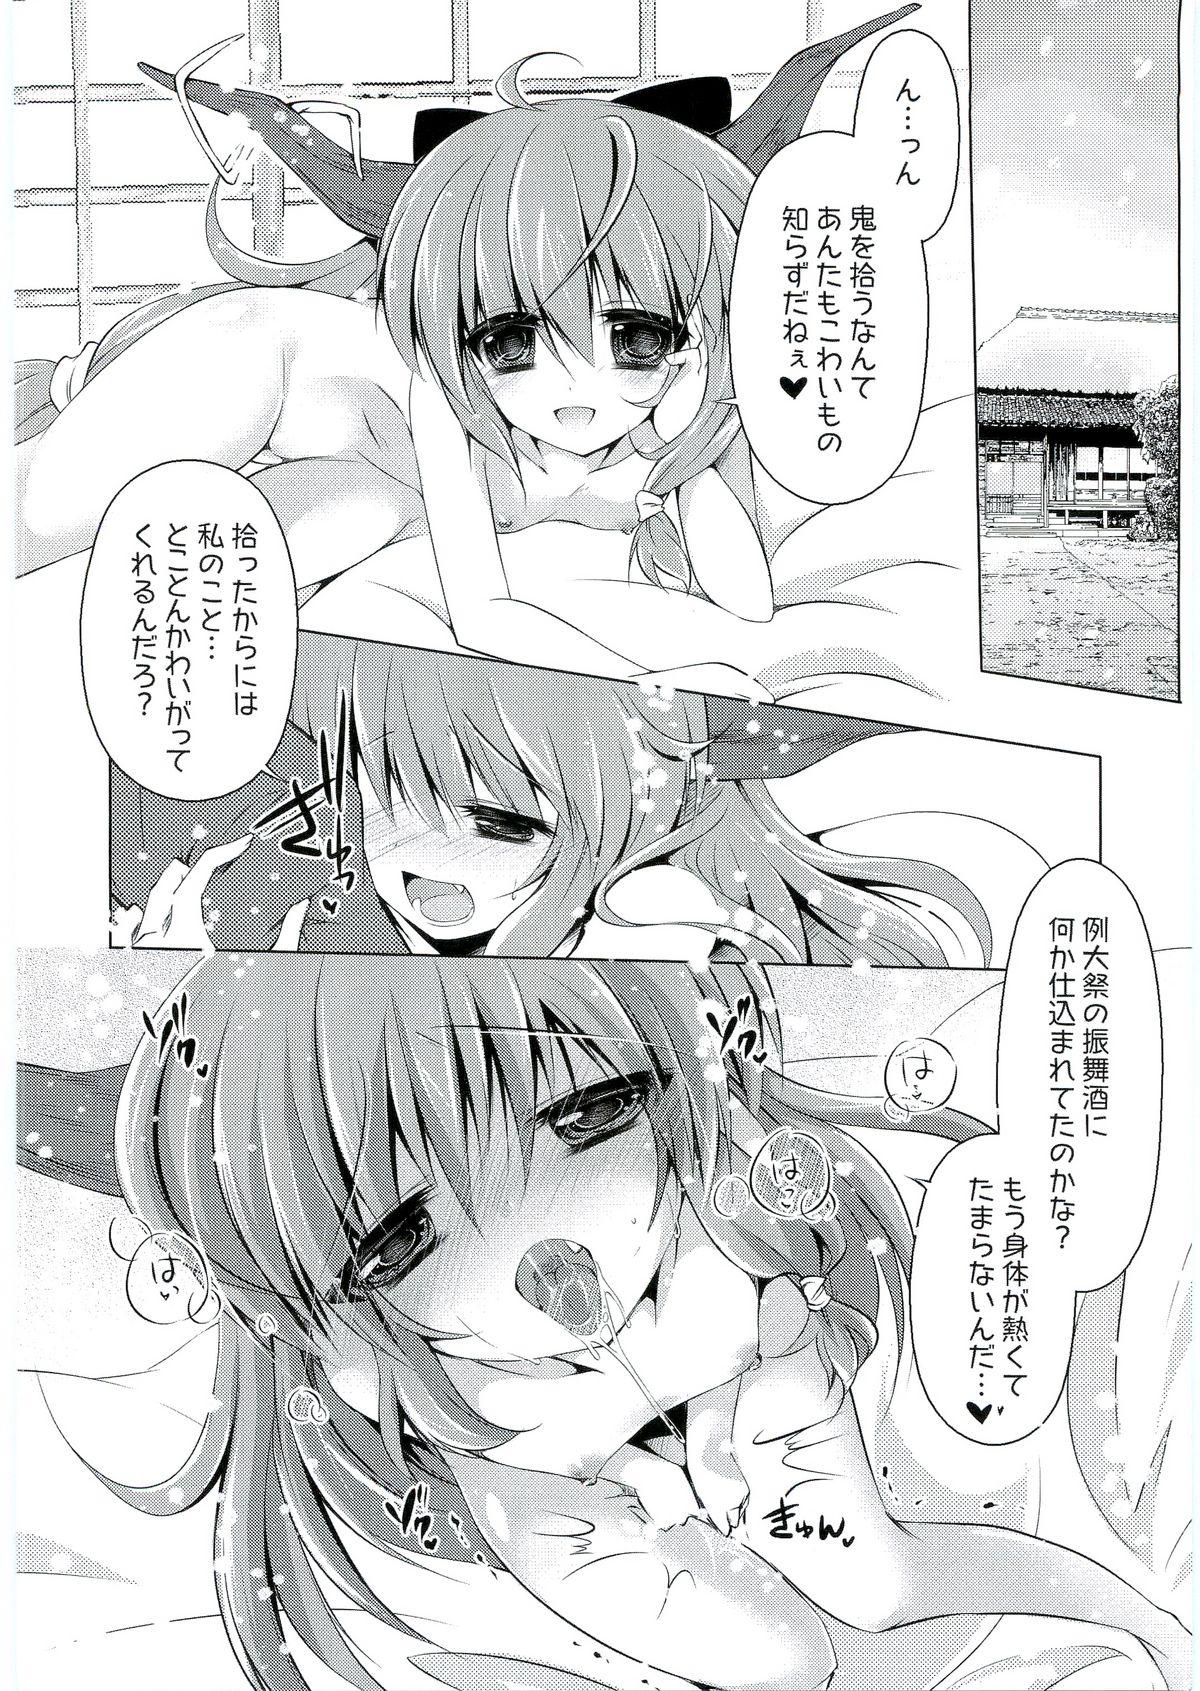 Chinese Suikachan Hirotta. - Touhou project Anal Sex - Page 3